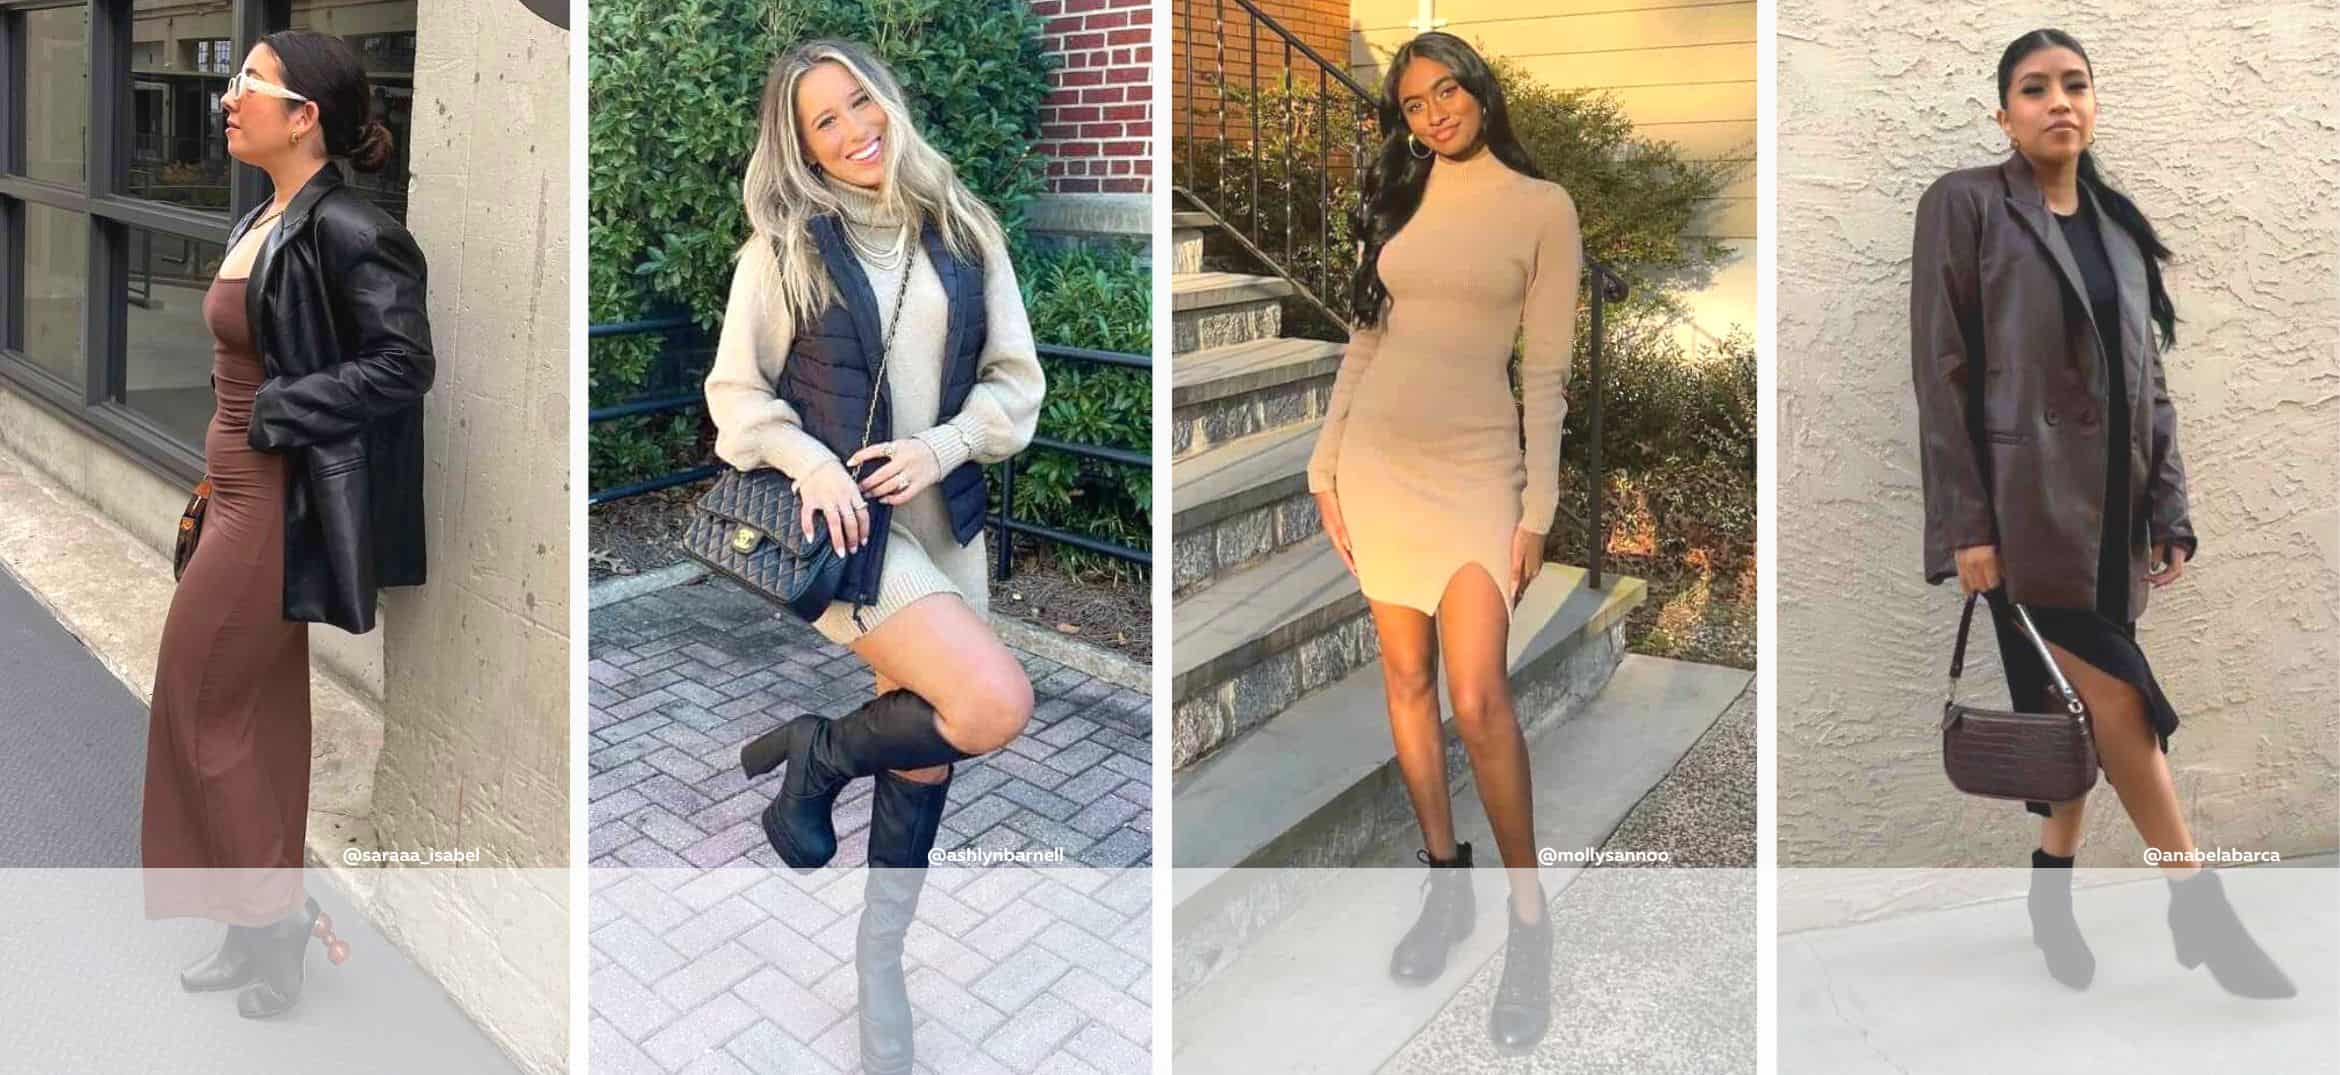 How to Style a Midi Dress with Knee High Boots - Polished Closets